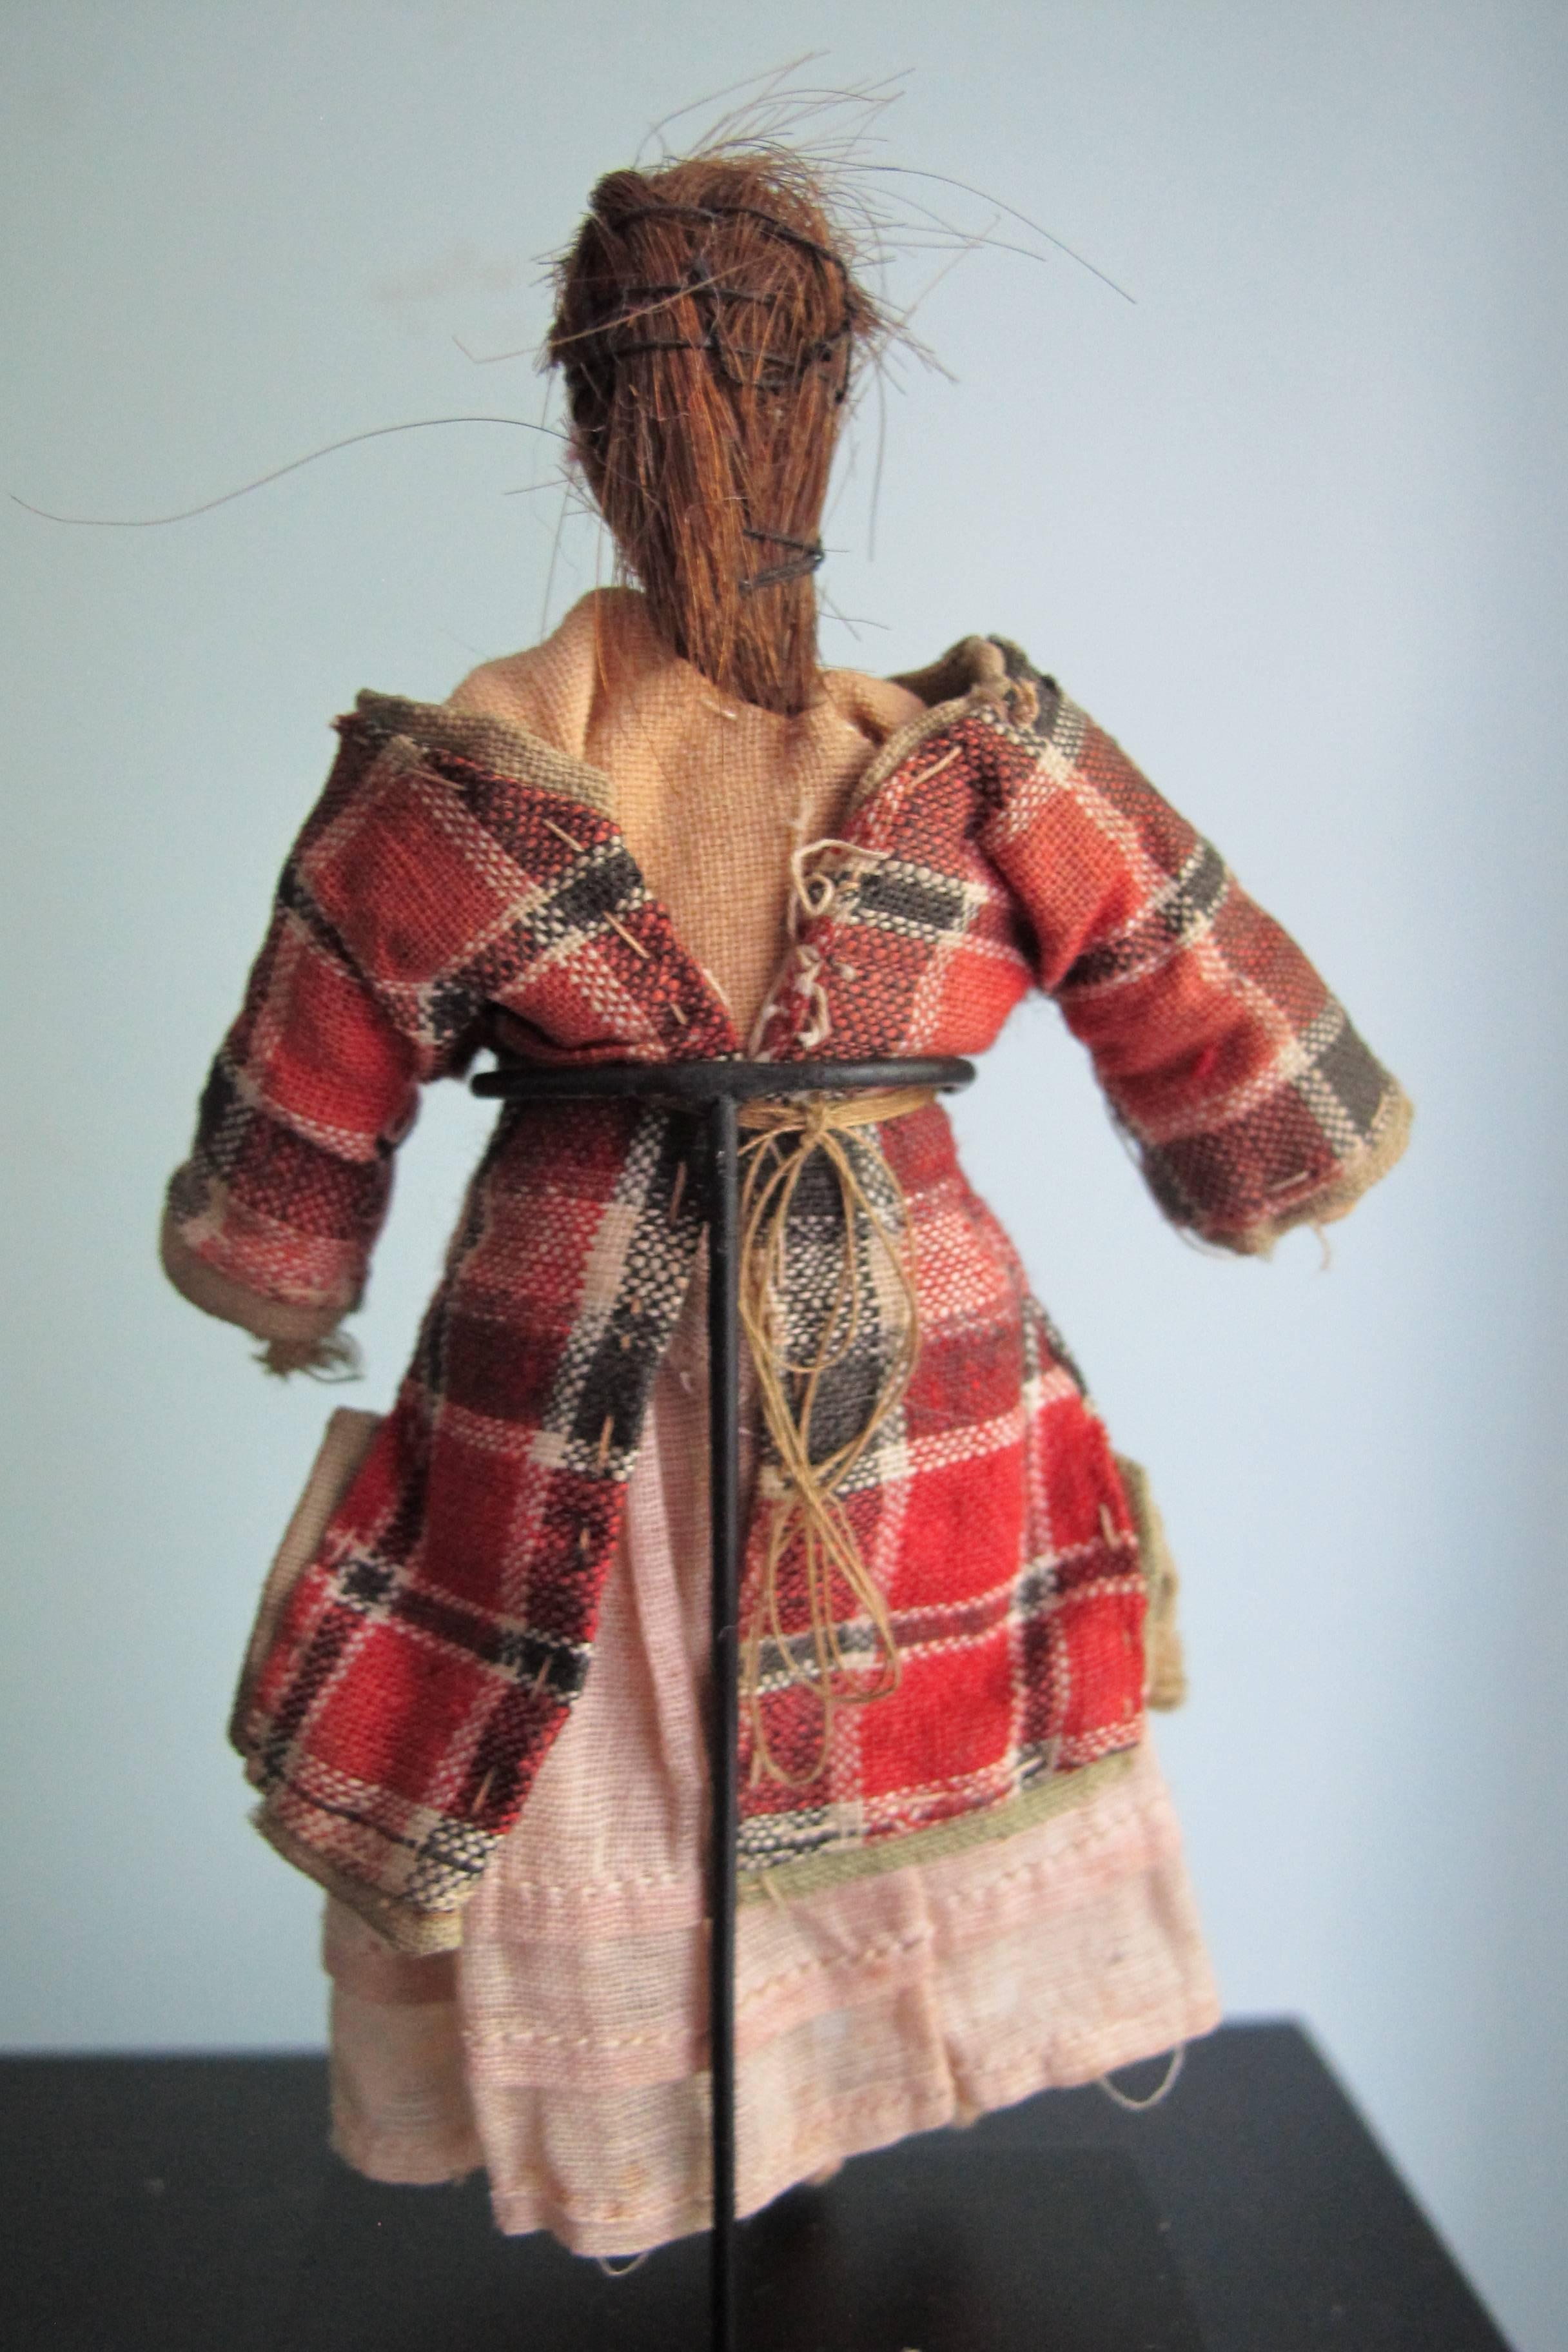 American Child's Cloth Pocket Doll with Human Hair